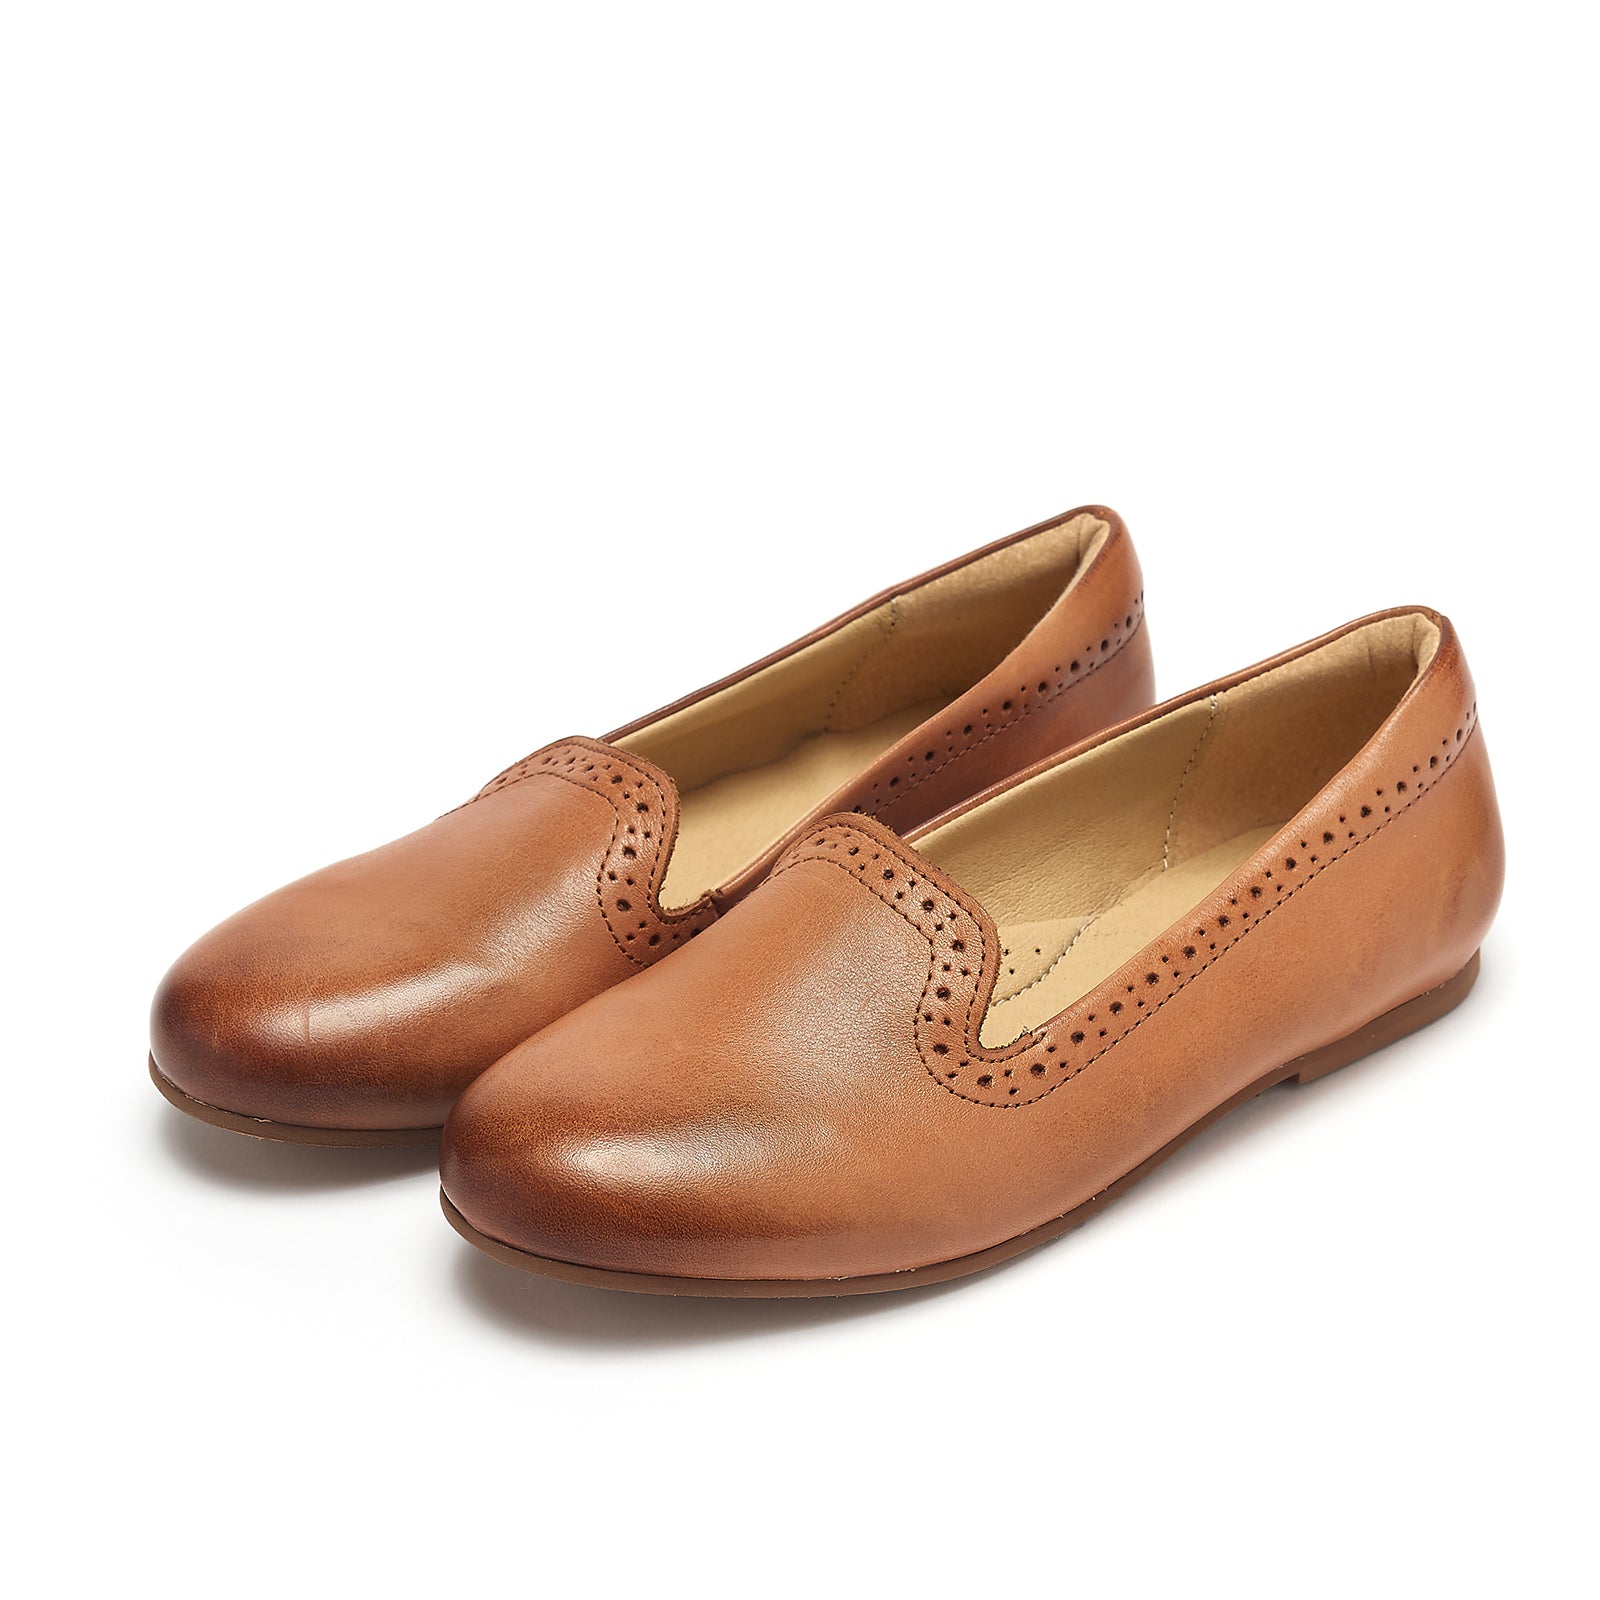 Young Soles Sindy Tan Leather Slipper Shoes